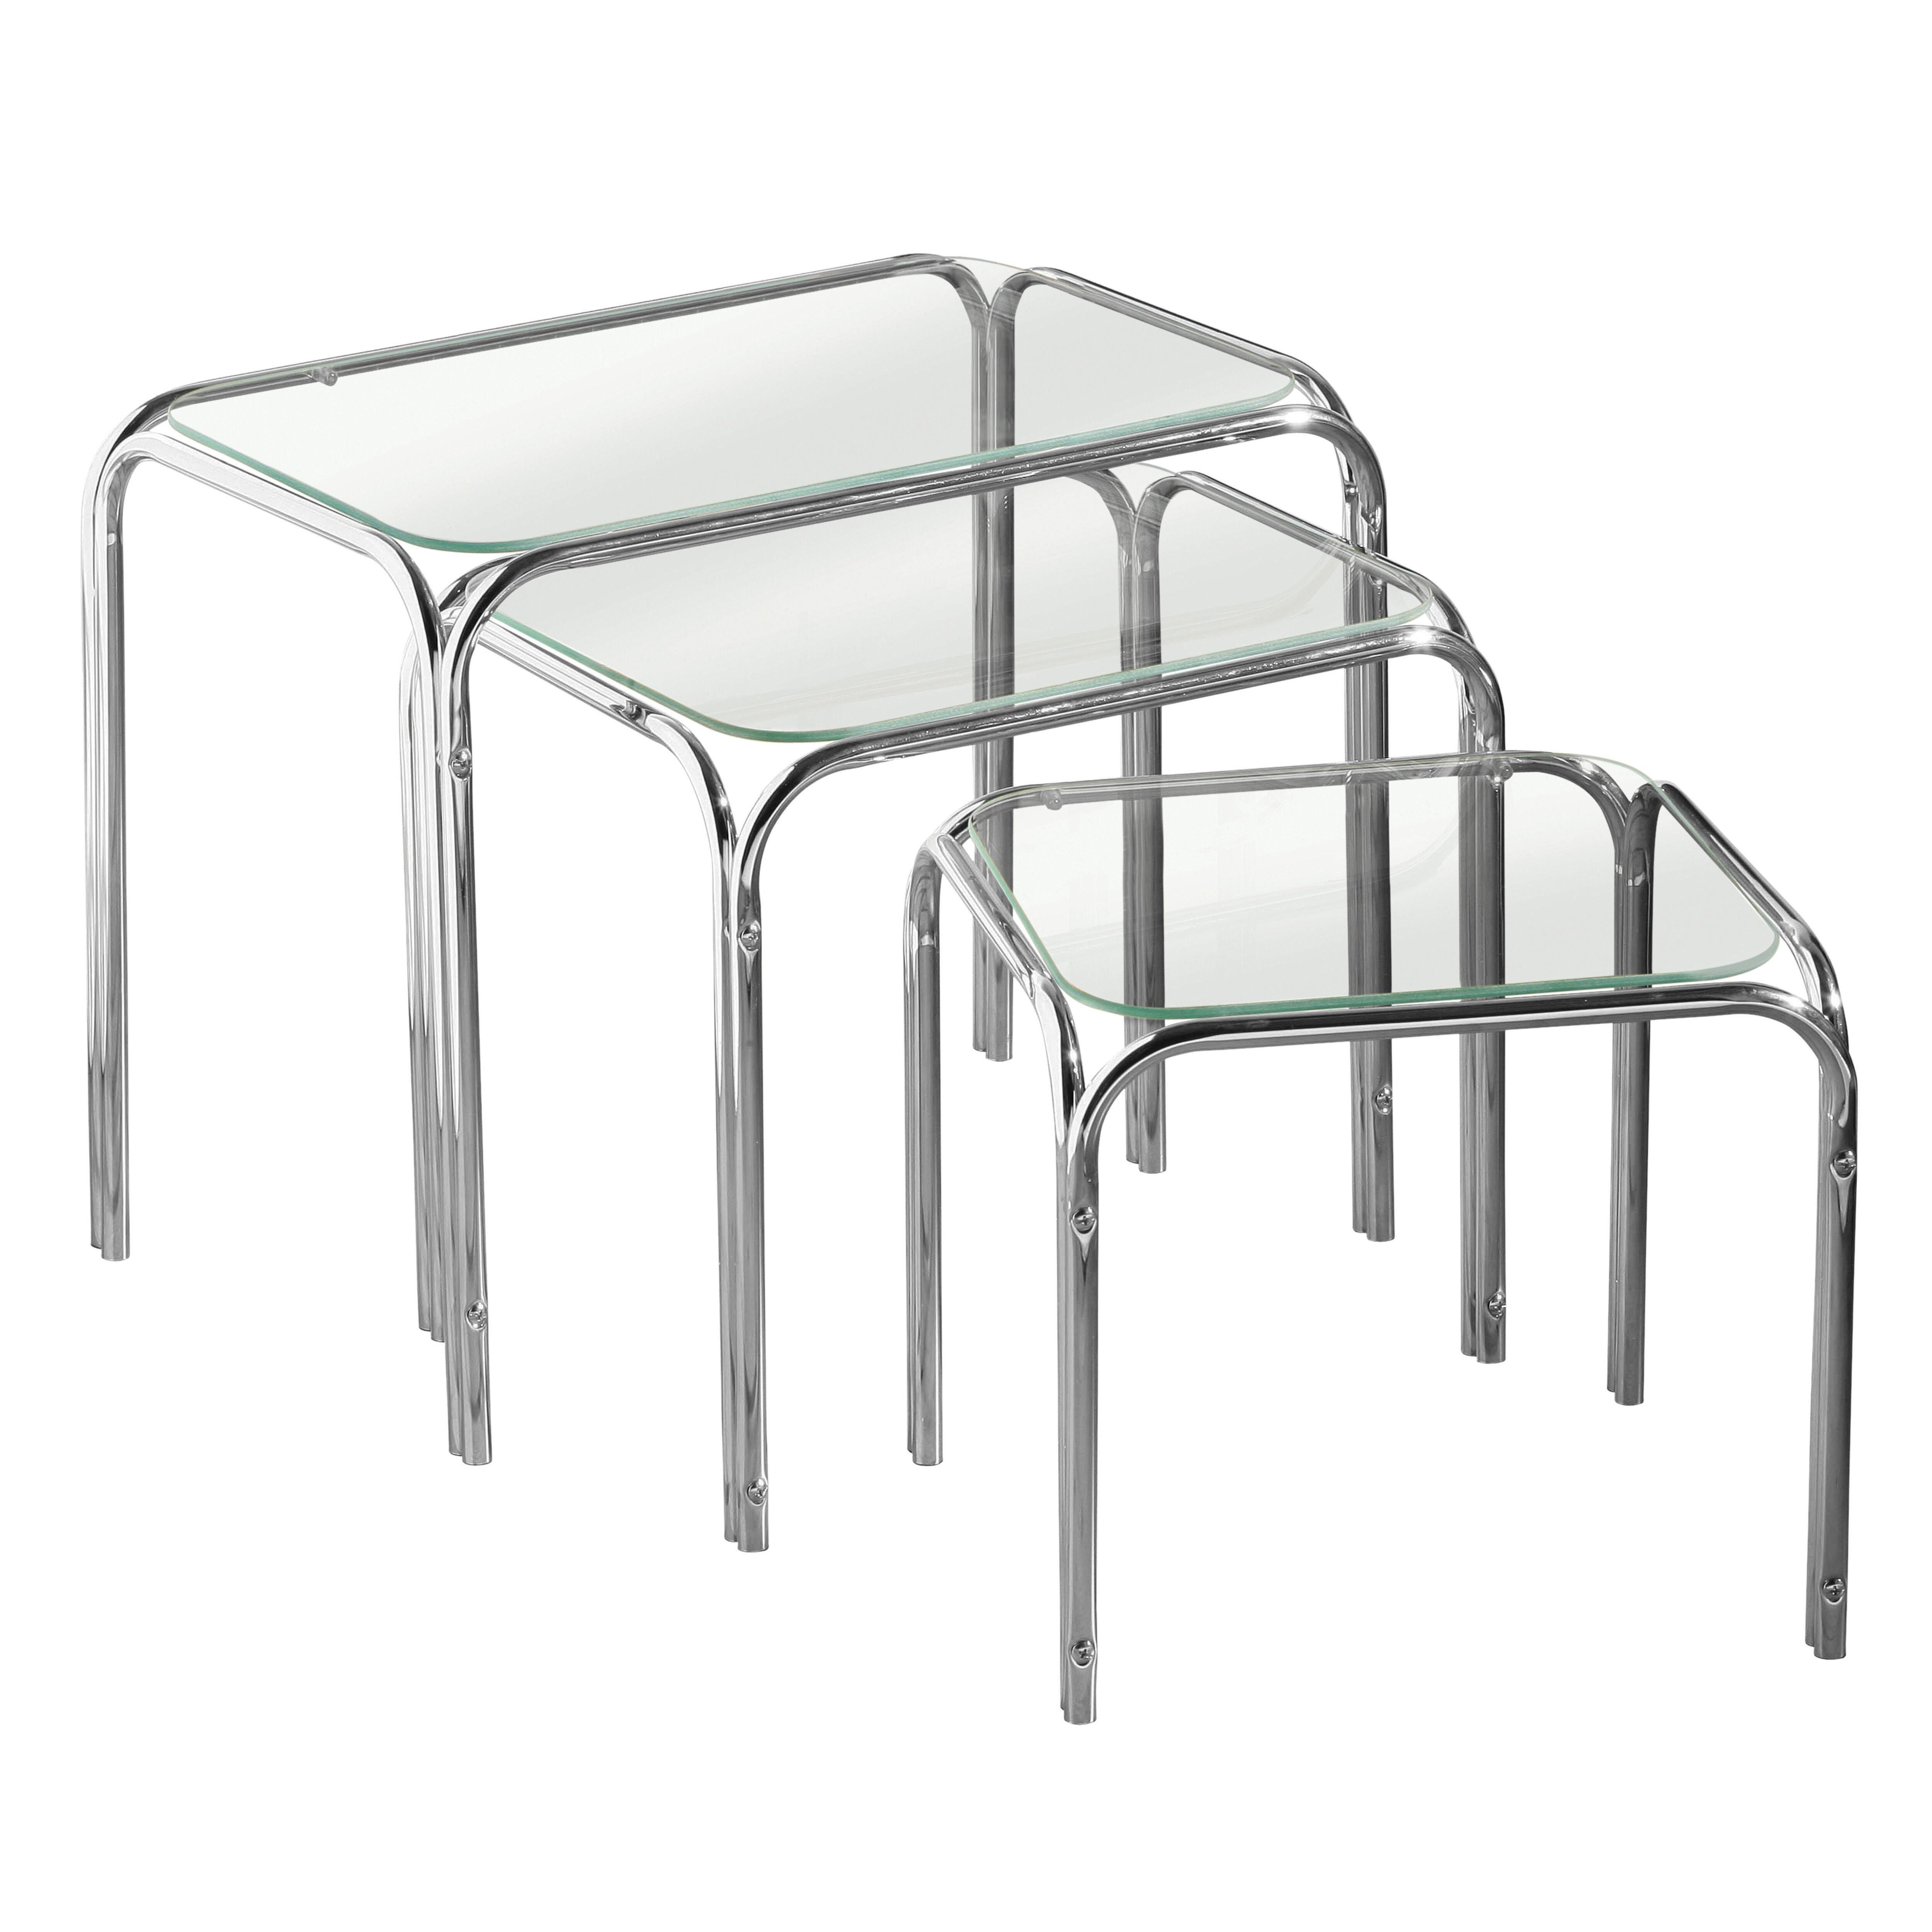 Nest Of 3 Clear Glass Pointed Oval Tables - image 1